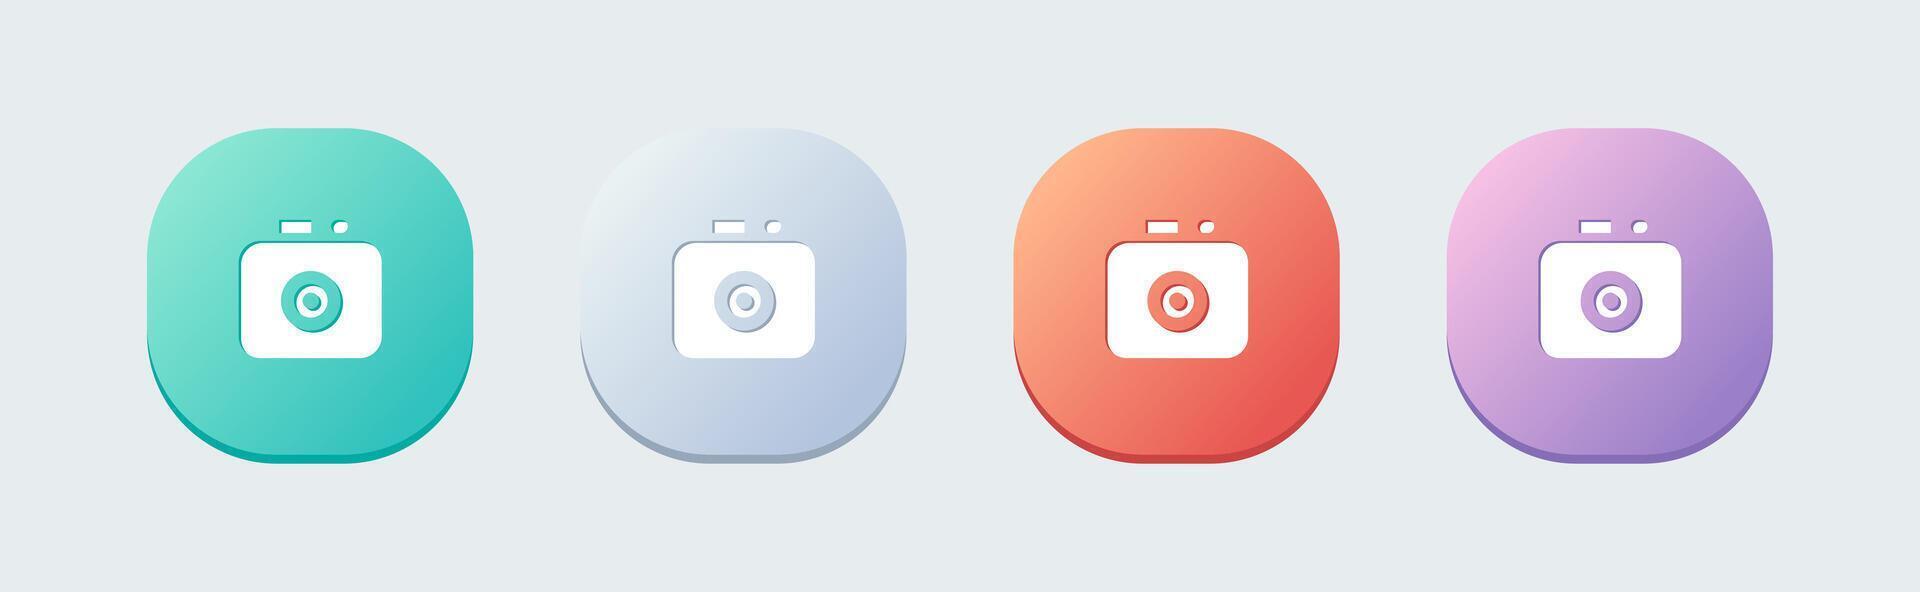 Camera solid icon in flat design style. Capture buttons signs vector illustration.